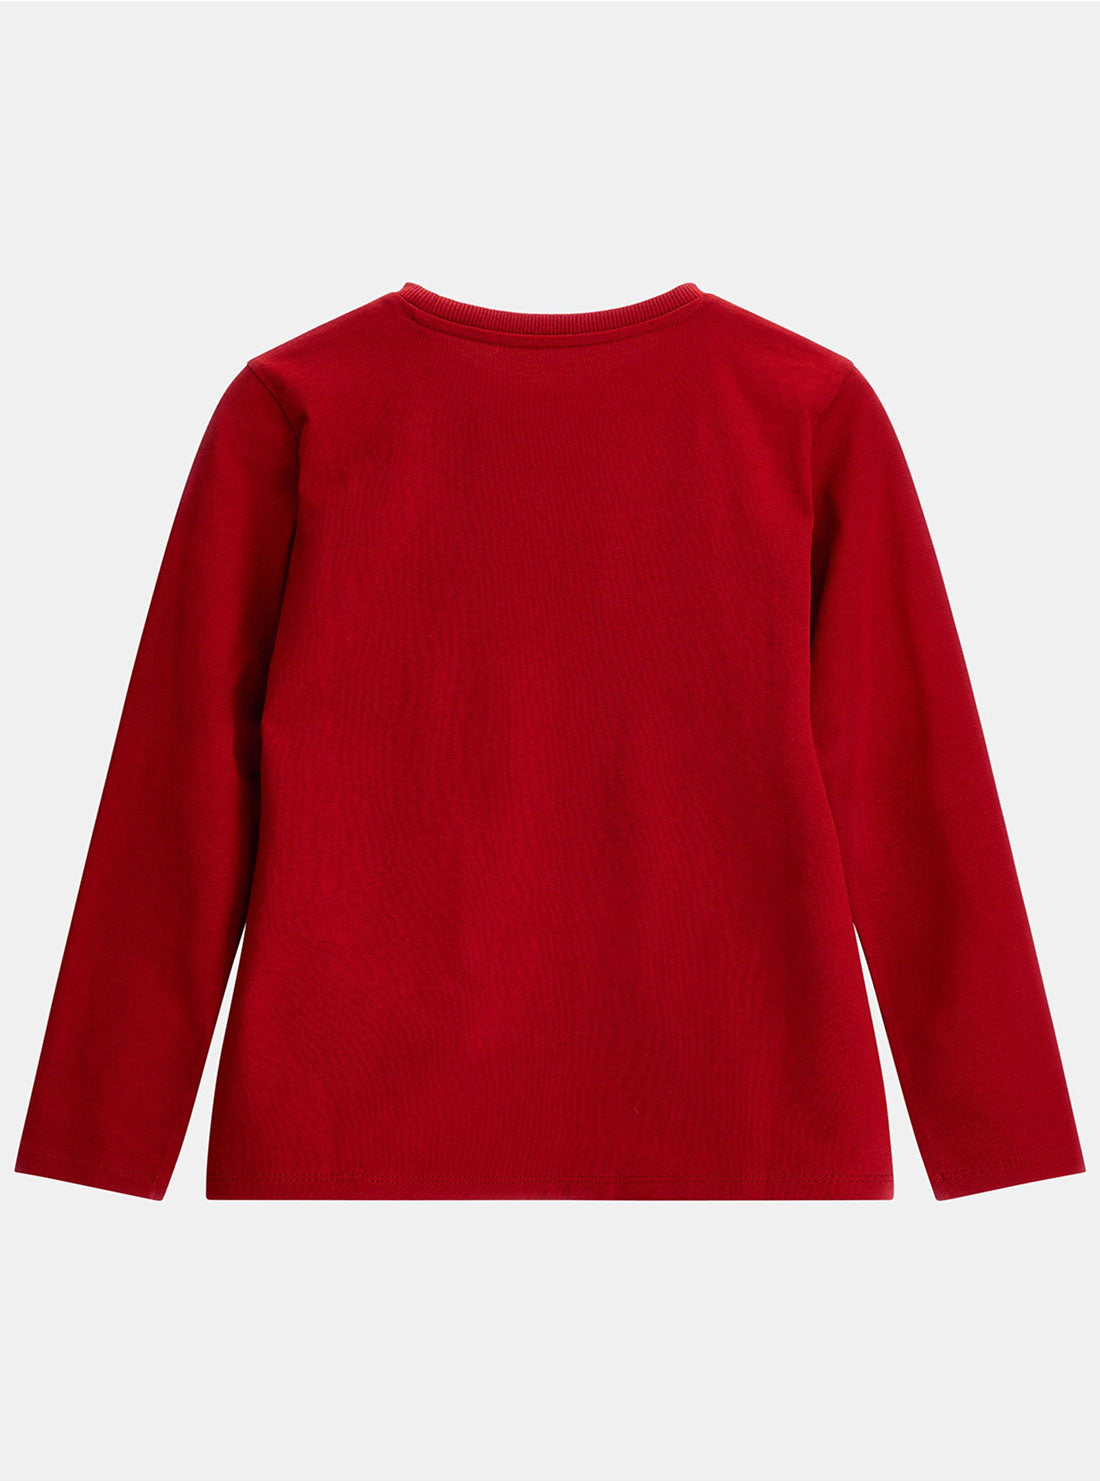 GUESS Red Long Sleeve T-Shirt (7-16) back view